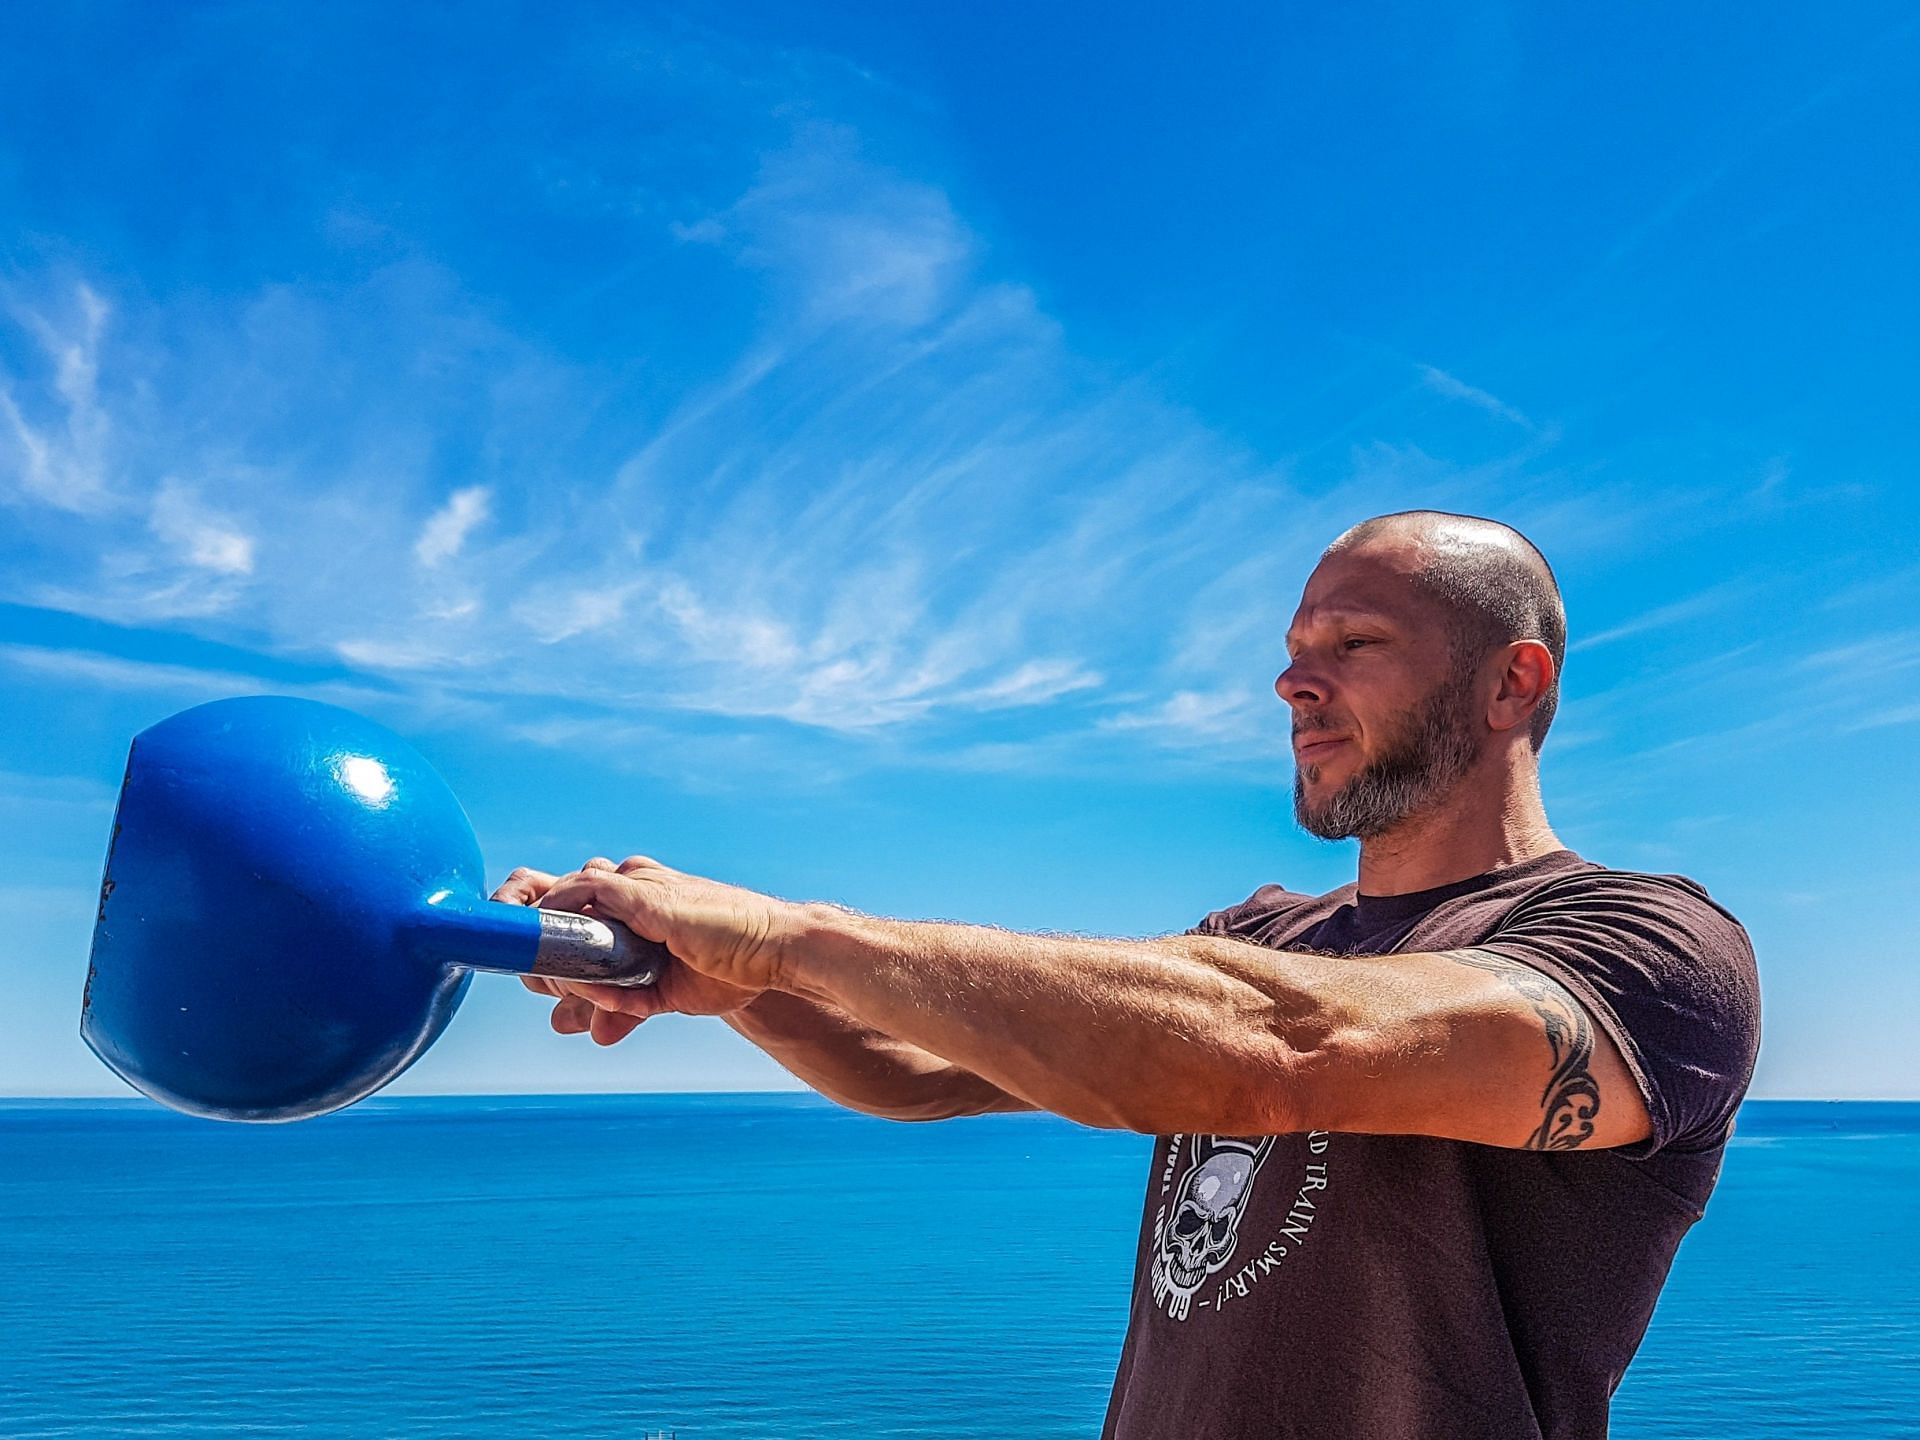 Kettlebell swings are an awesome full-body workout that targets many muscles at once. (Image via Unsplash/ Taco Fleur)